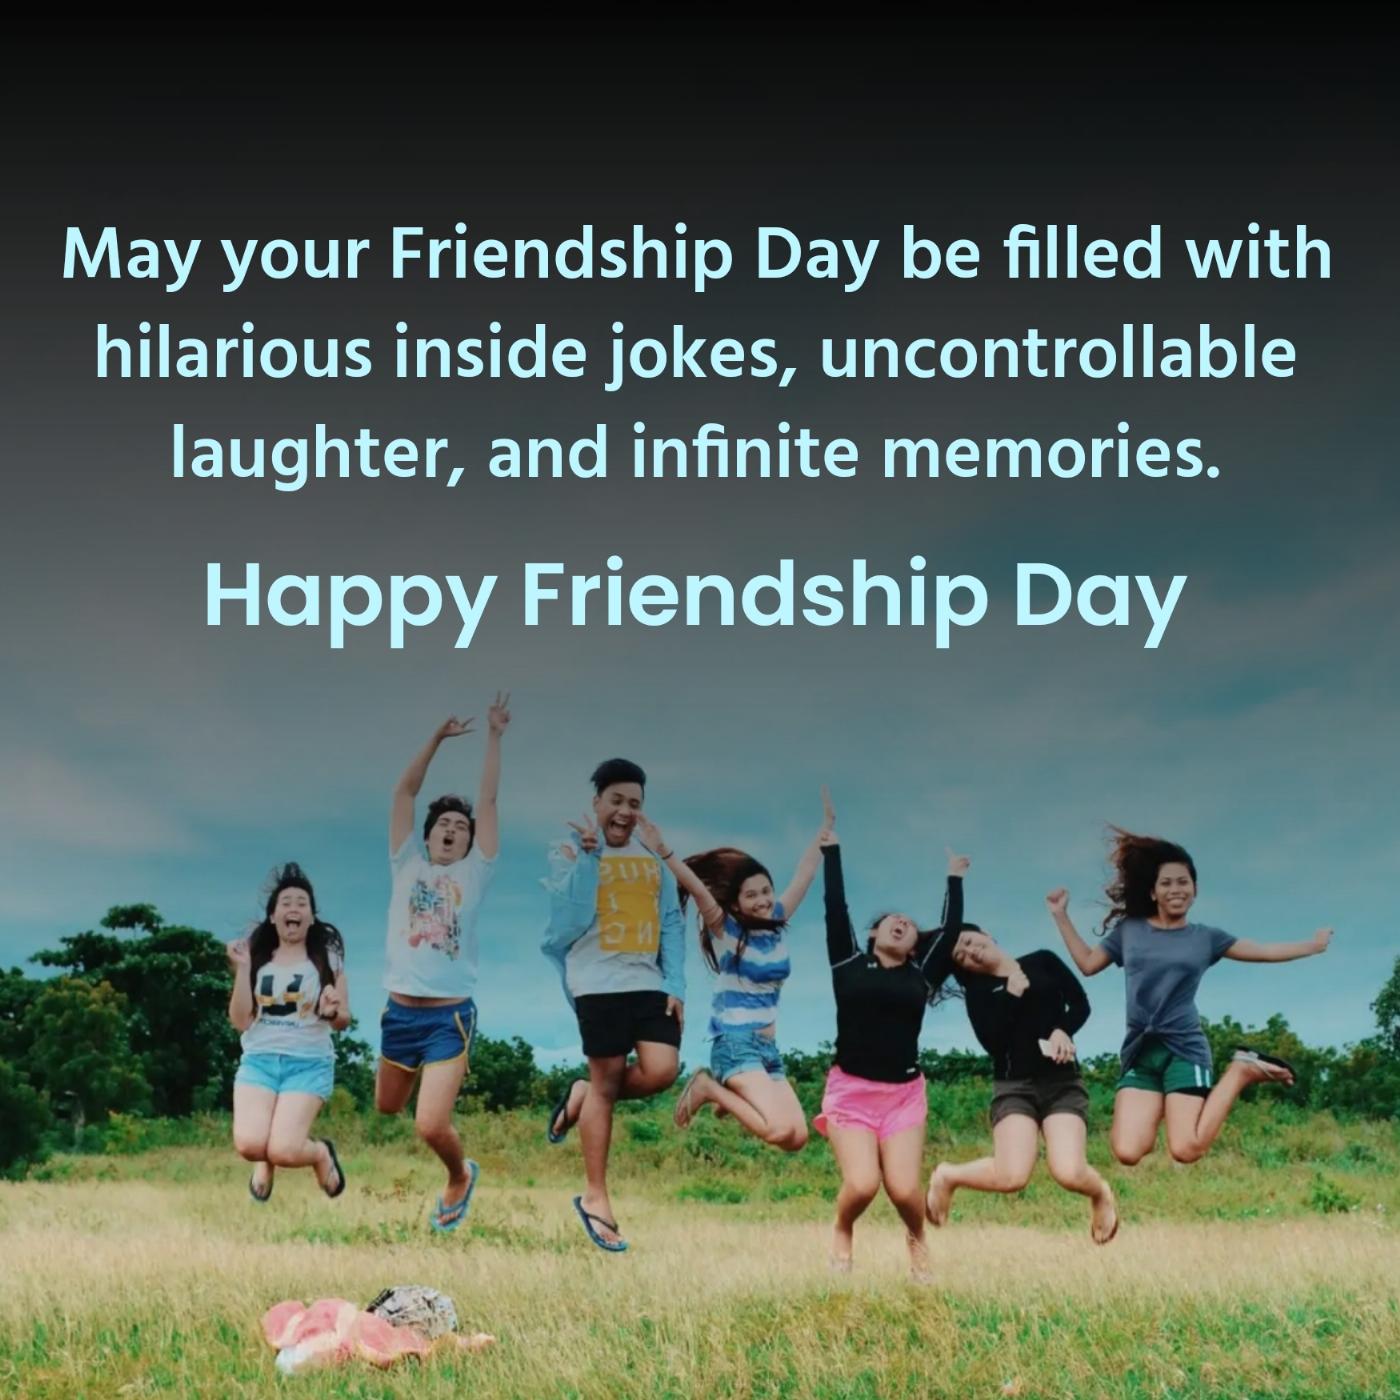 May your Friendship Day be filled with hilarious inside jokes